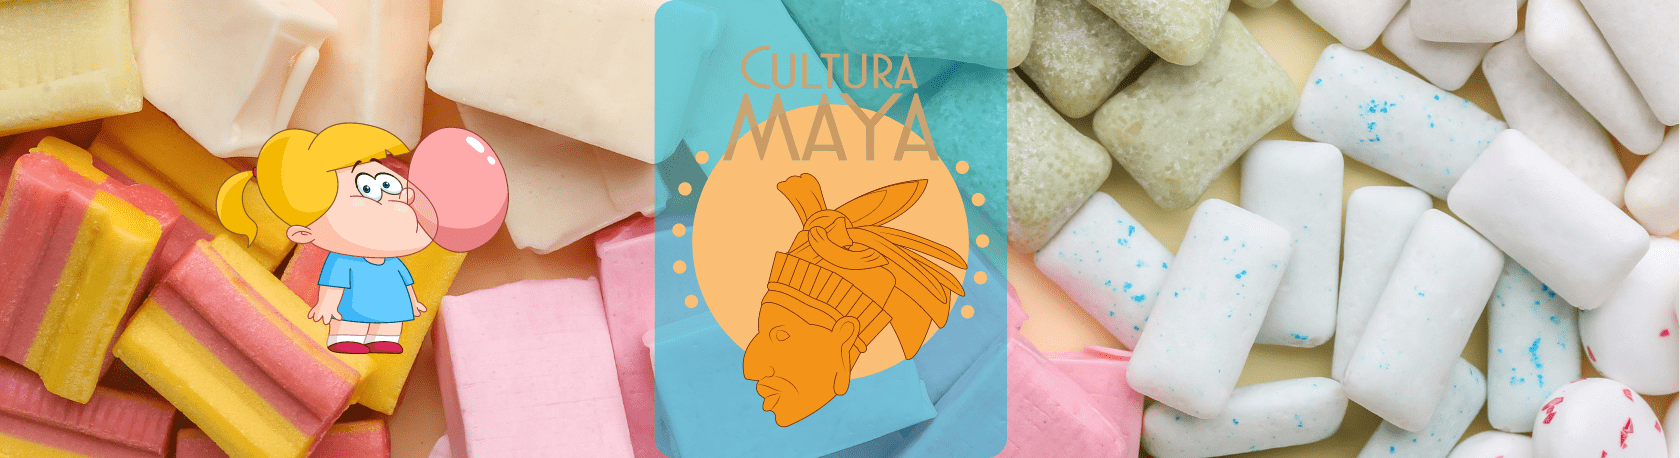 Practice Spanish while learning how the Maya people invented the chewing gum - Easy Español - Speak Spanish now